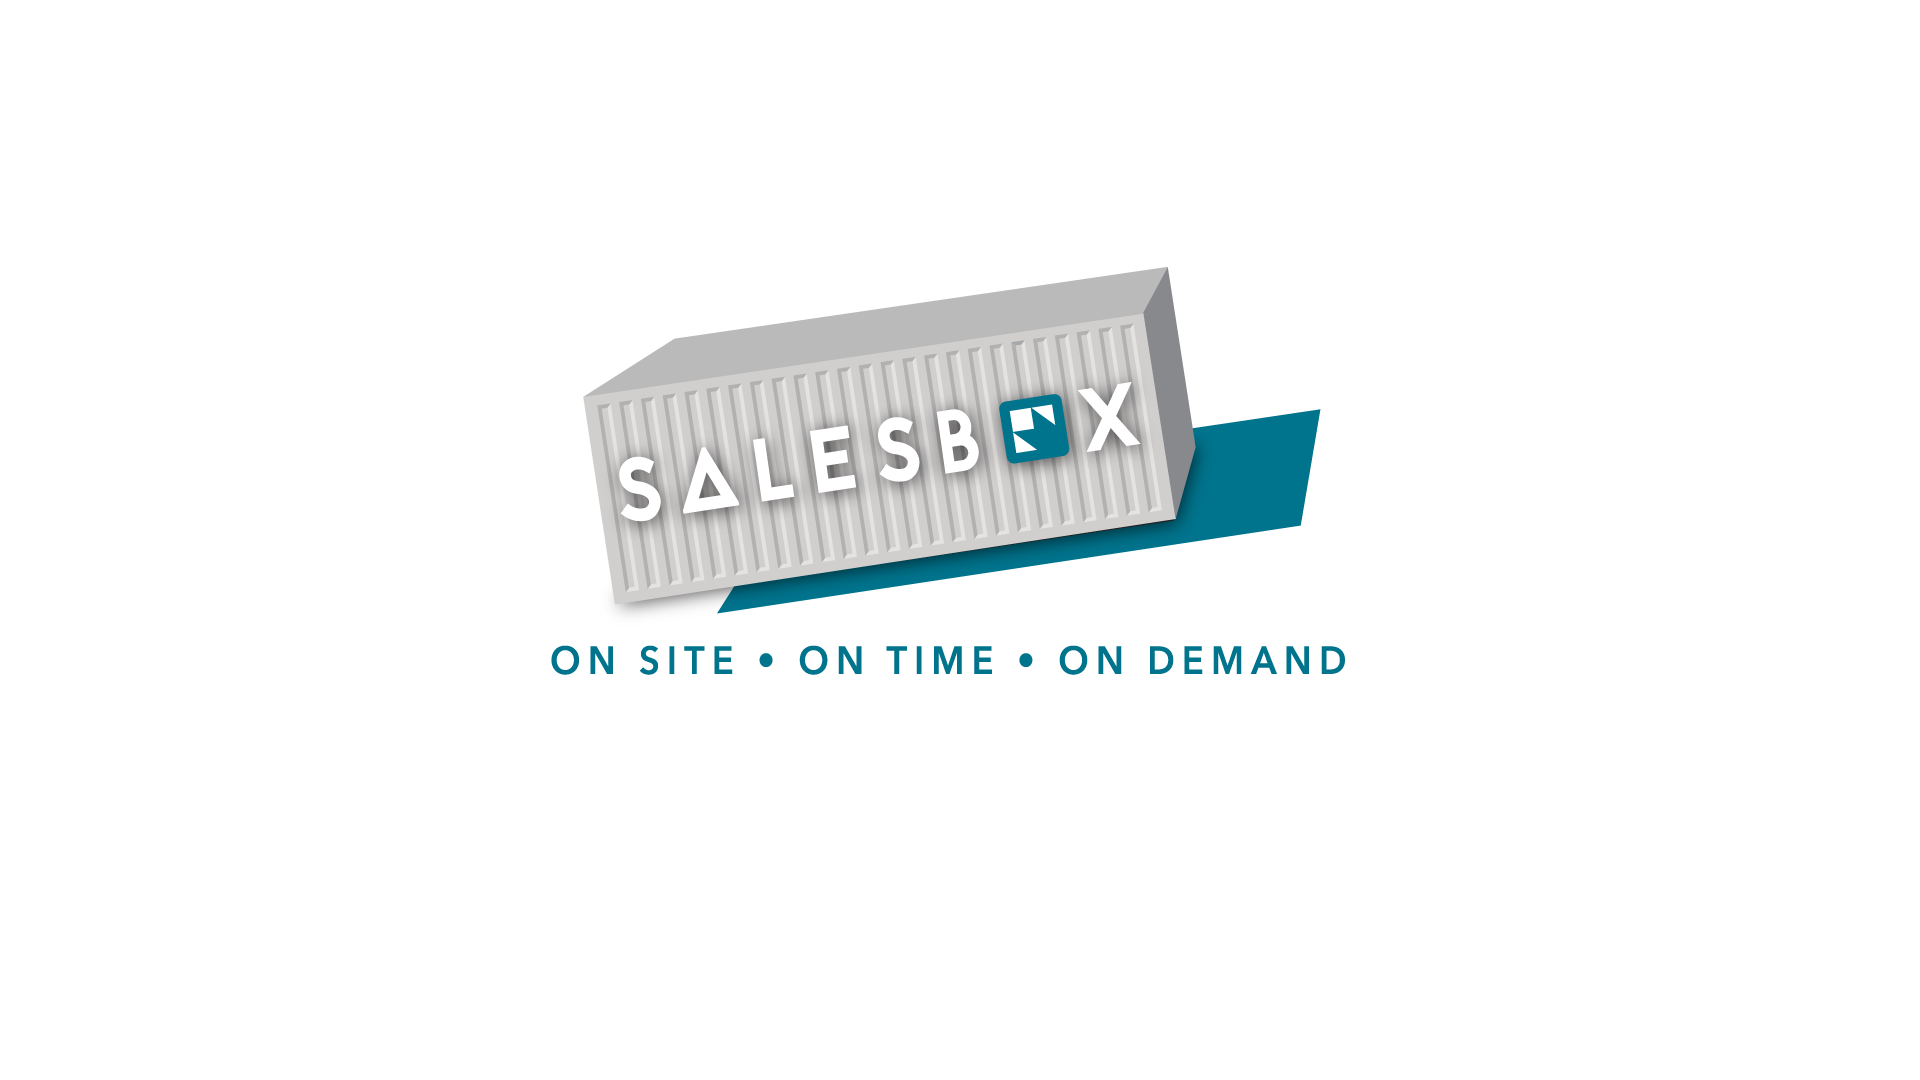 The Portable Sales Office Arrives - Salesbox Logo by Marketshare